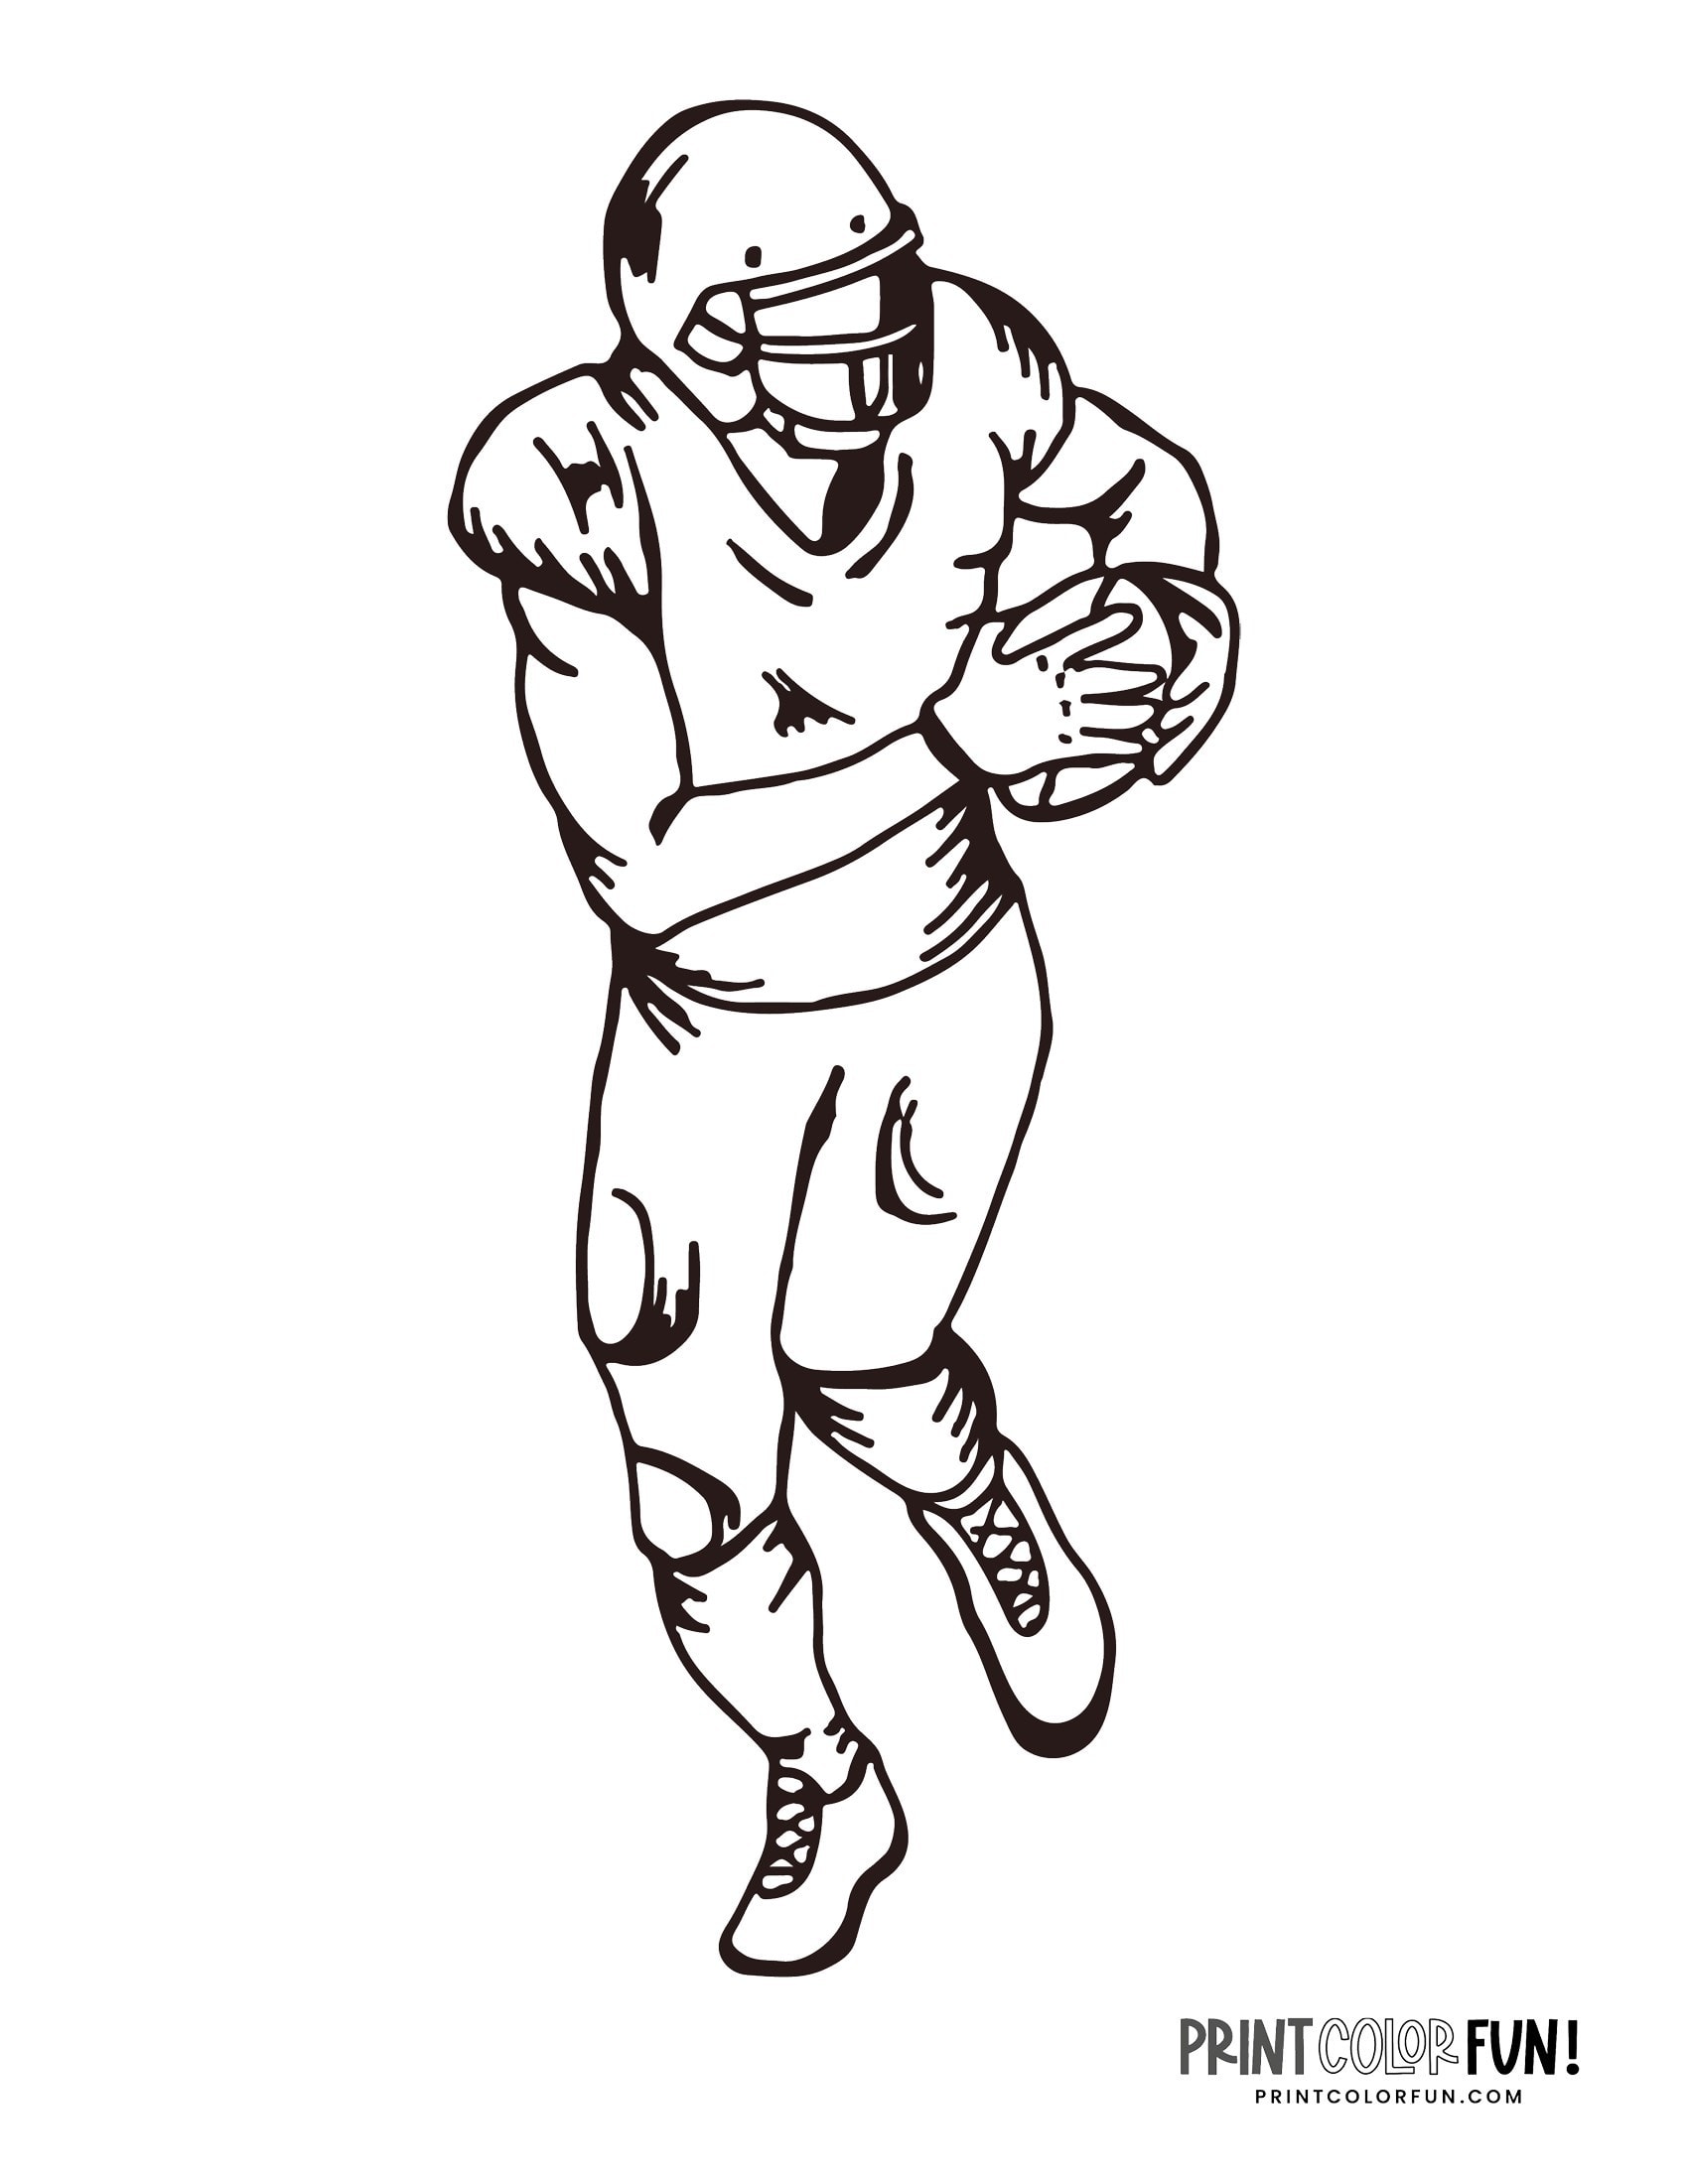 14 football player coloring pages Free sports printables Print Color